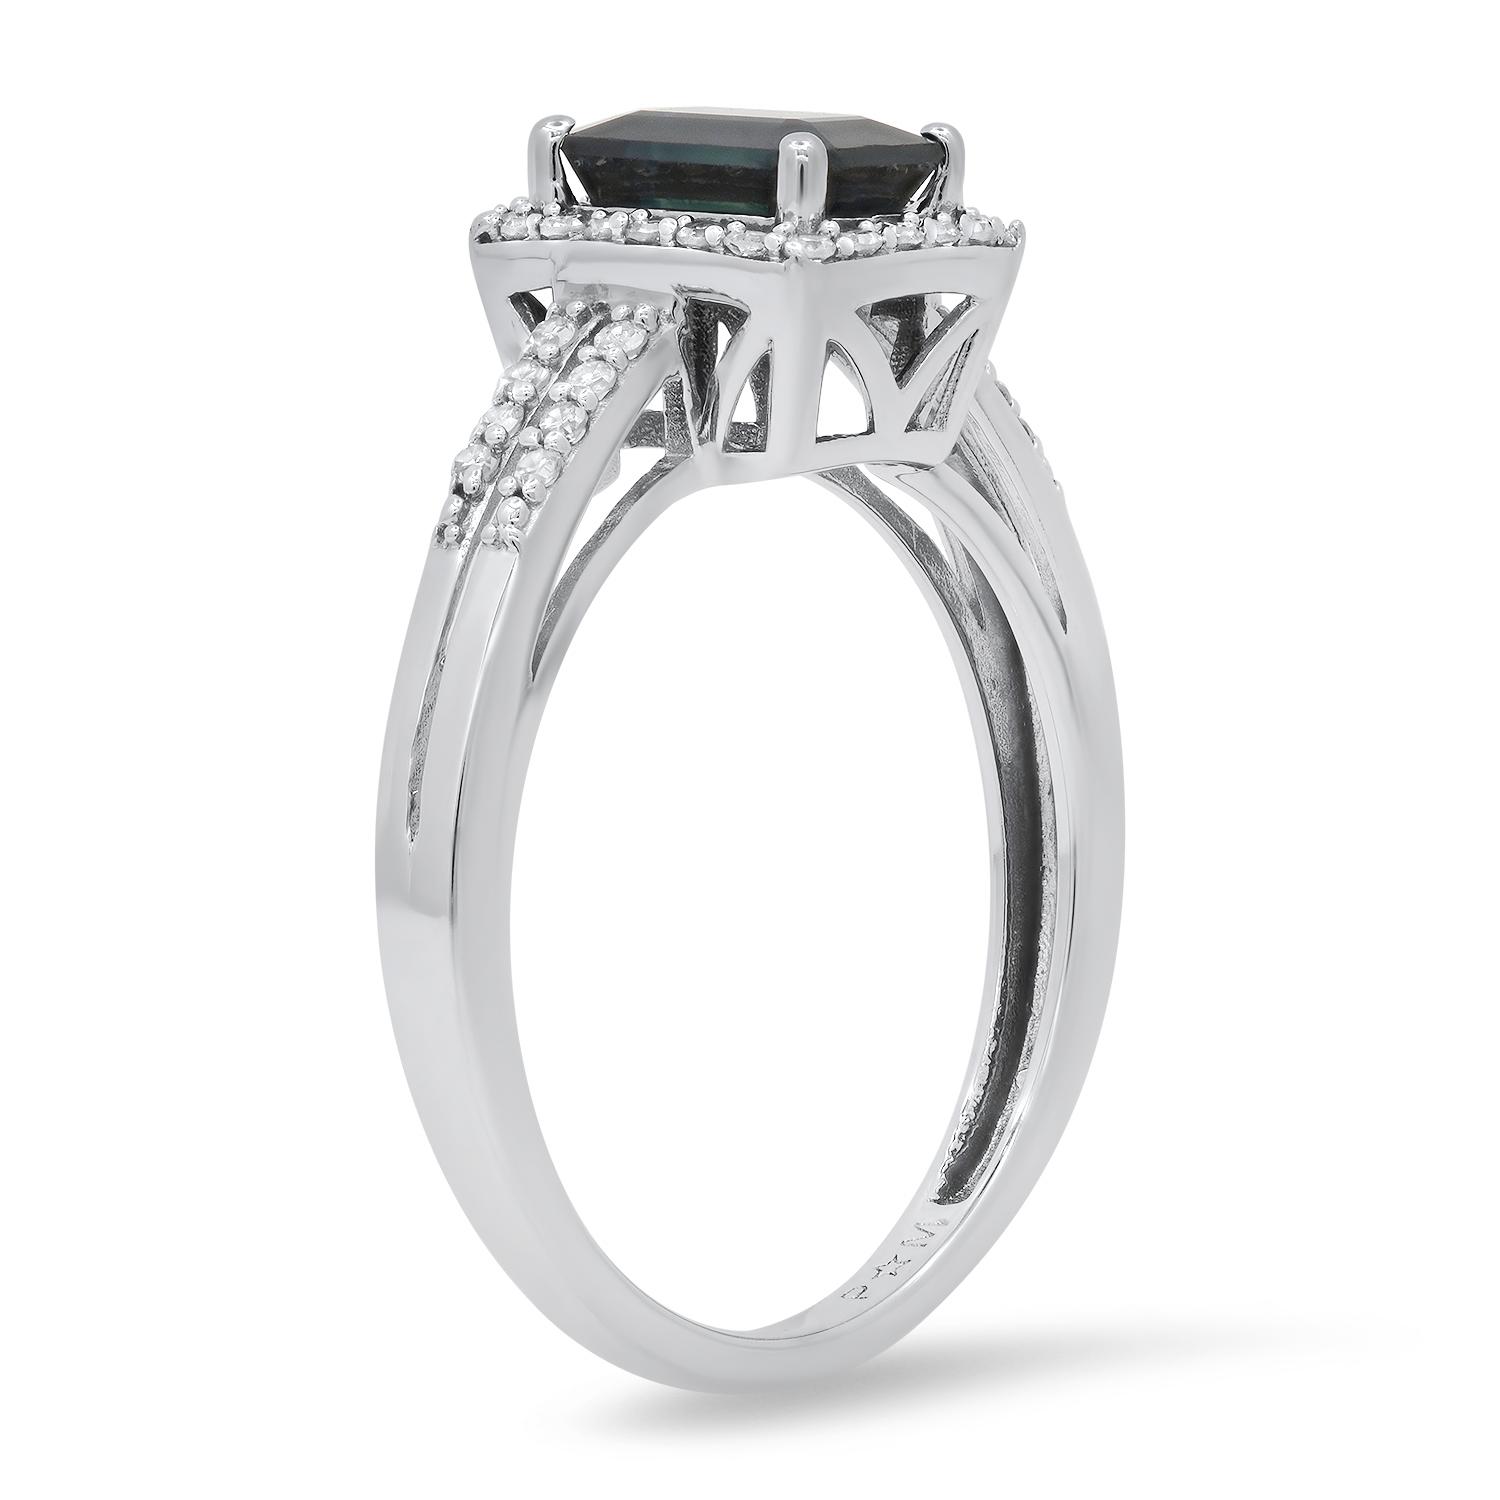 14K White Gold Setting with 1.1ct Sapphire and 0.20ct Diamond Ladies Ring